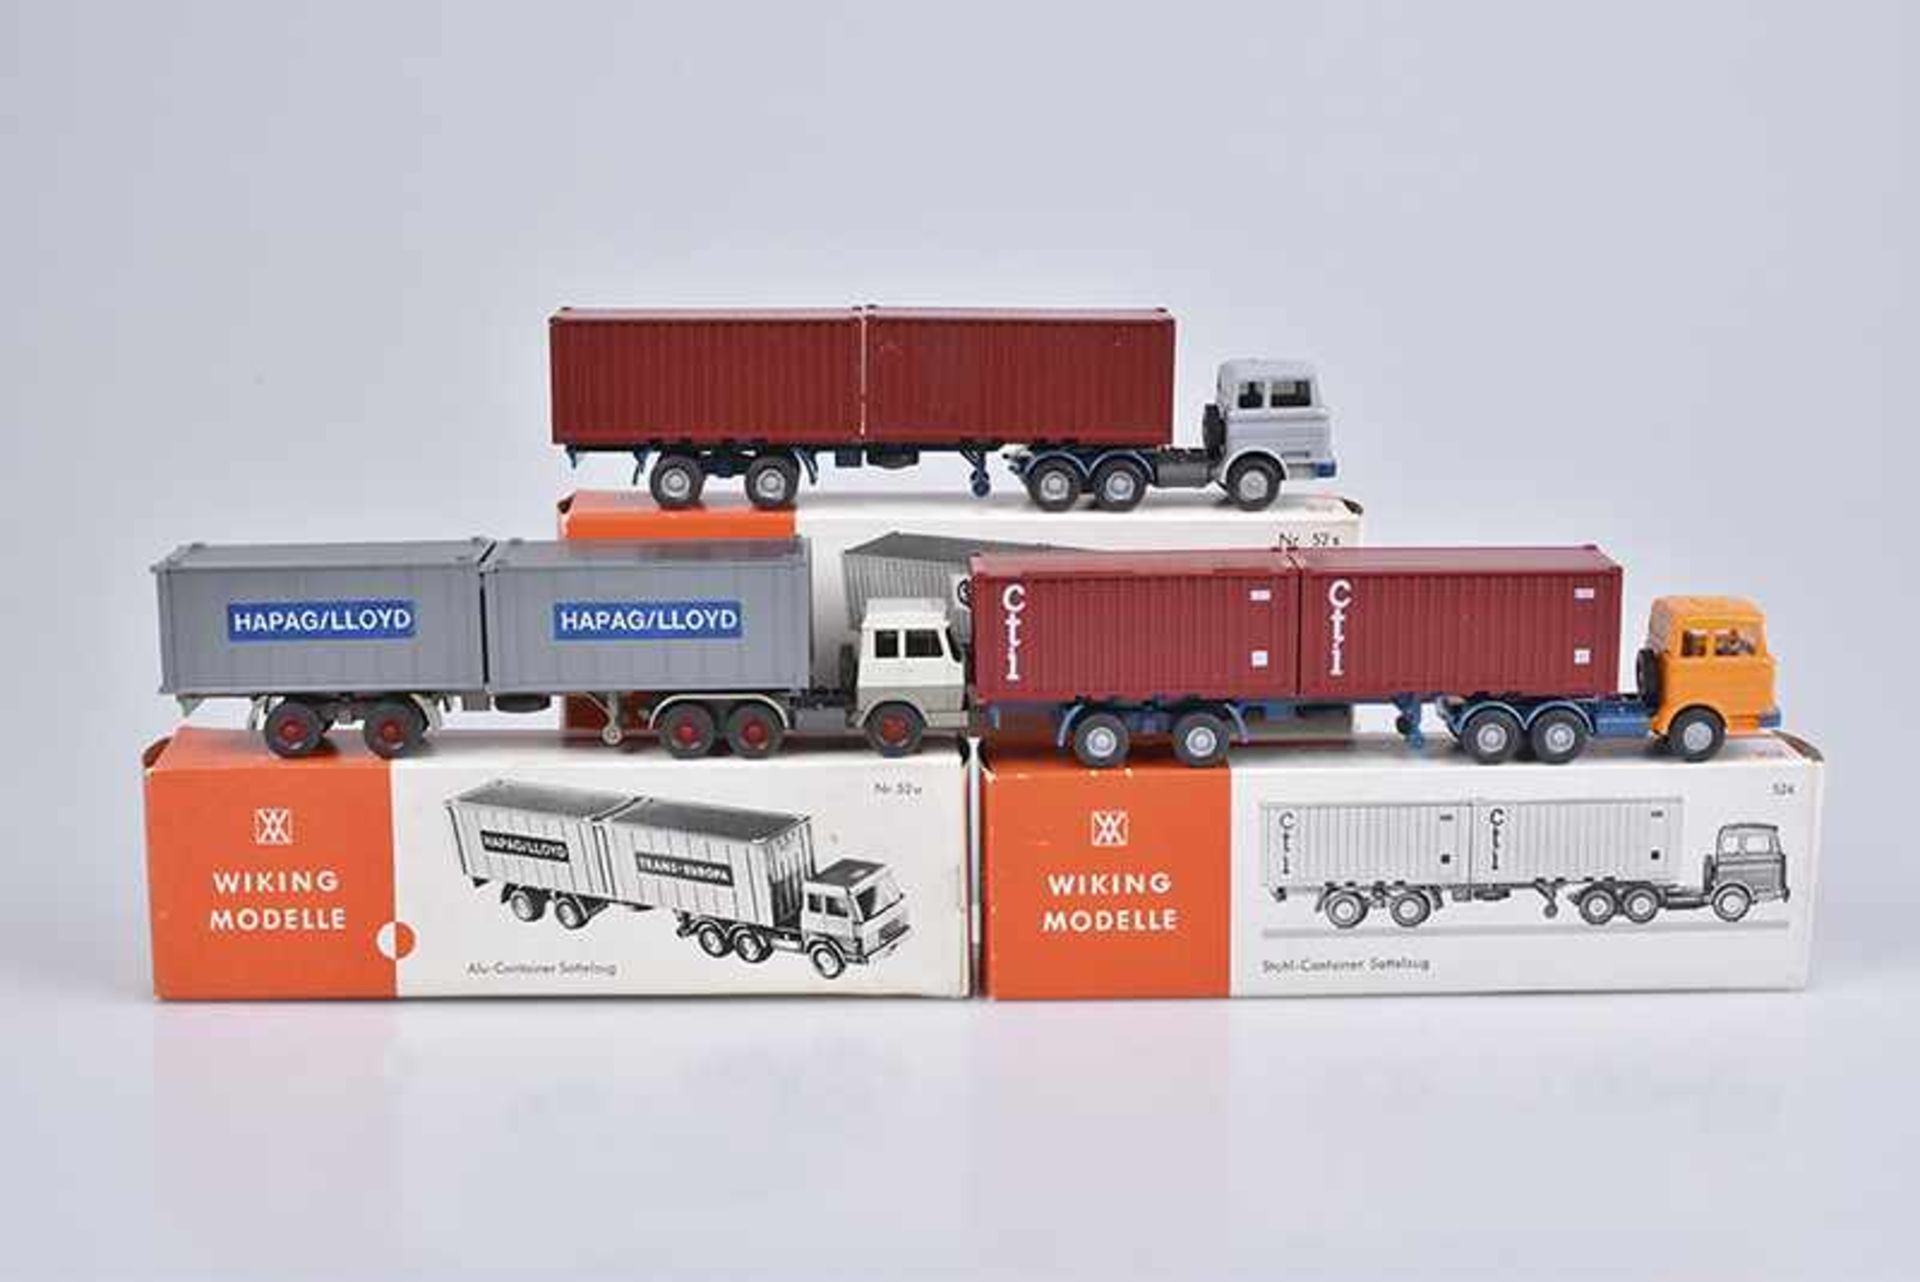 WIKING 3 LKW Modelle, Hp, M 1:87, Stahl-Container Sattelzug, 524, Cti, Stahl-Container Sattelzug,